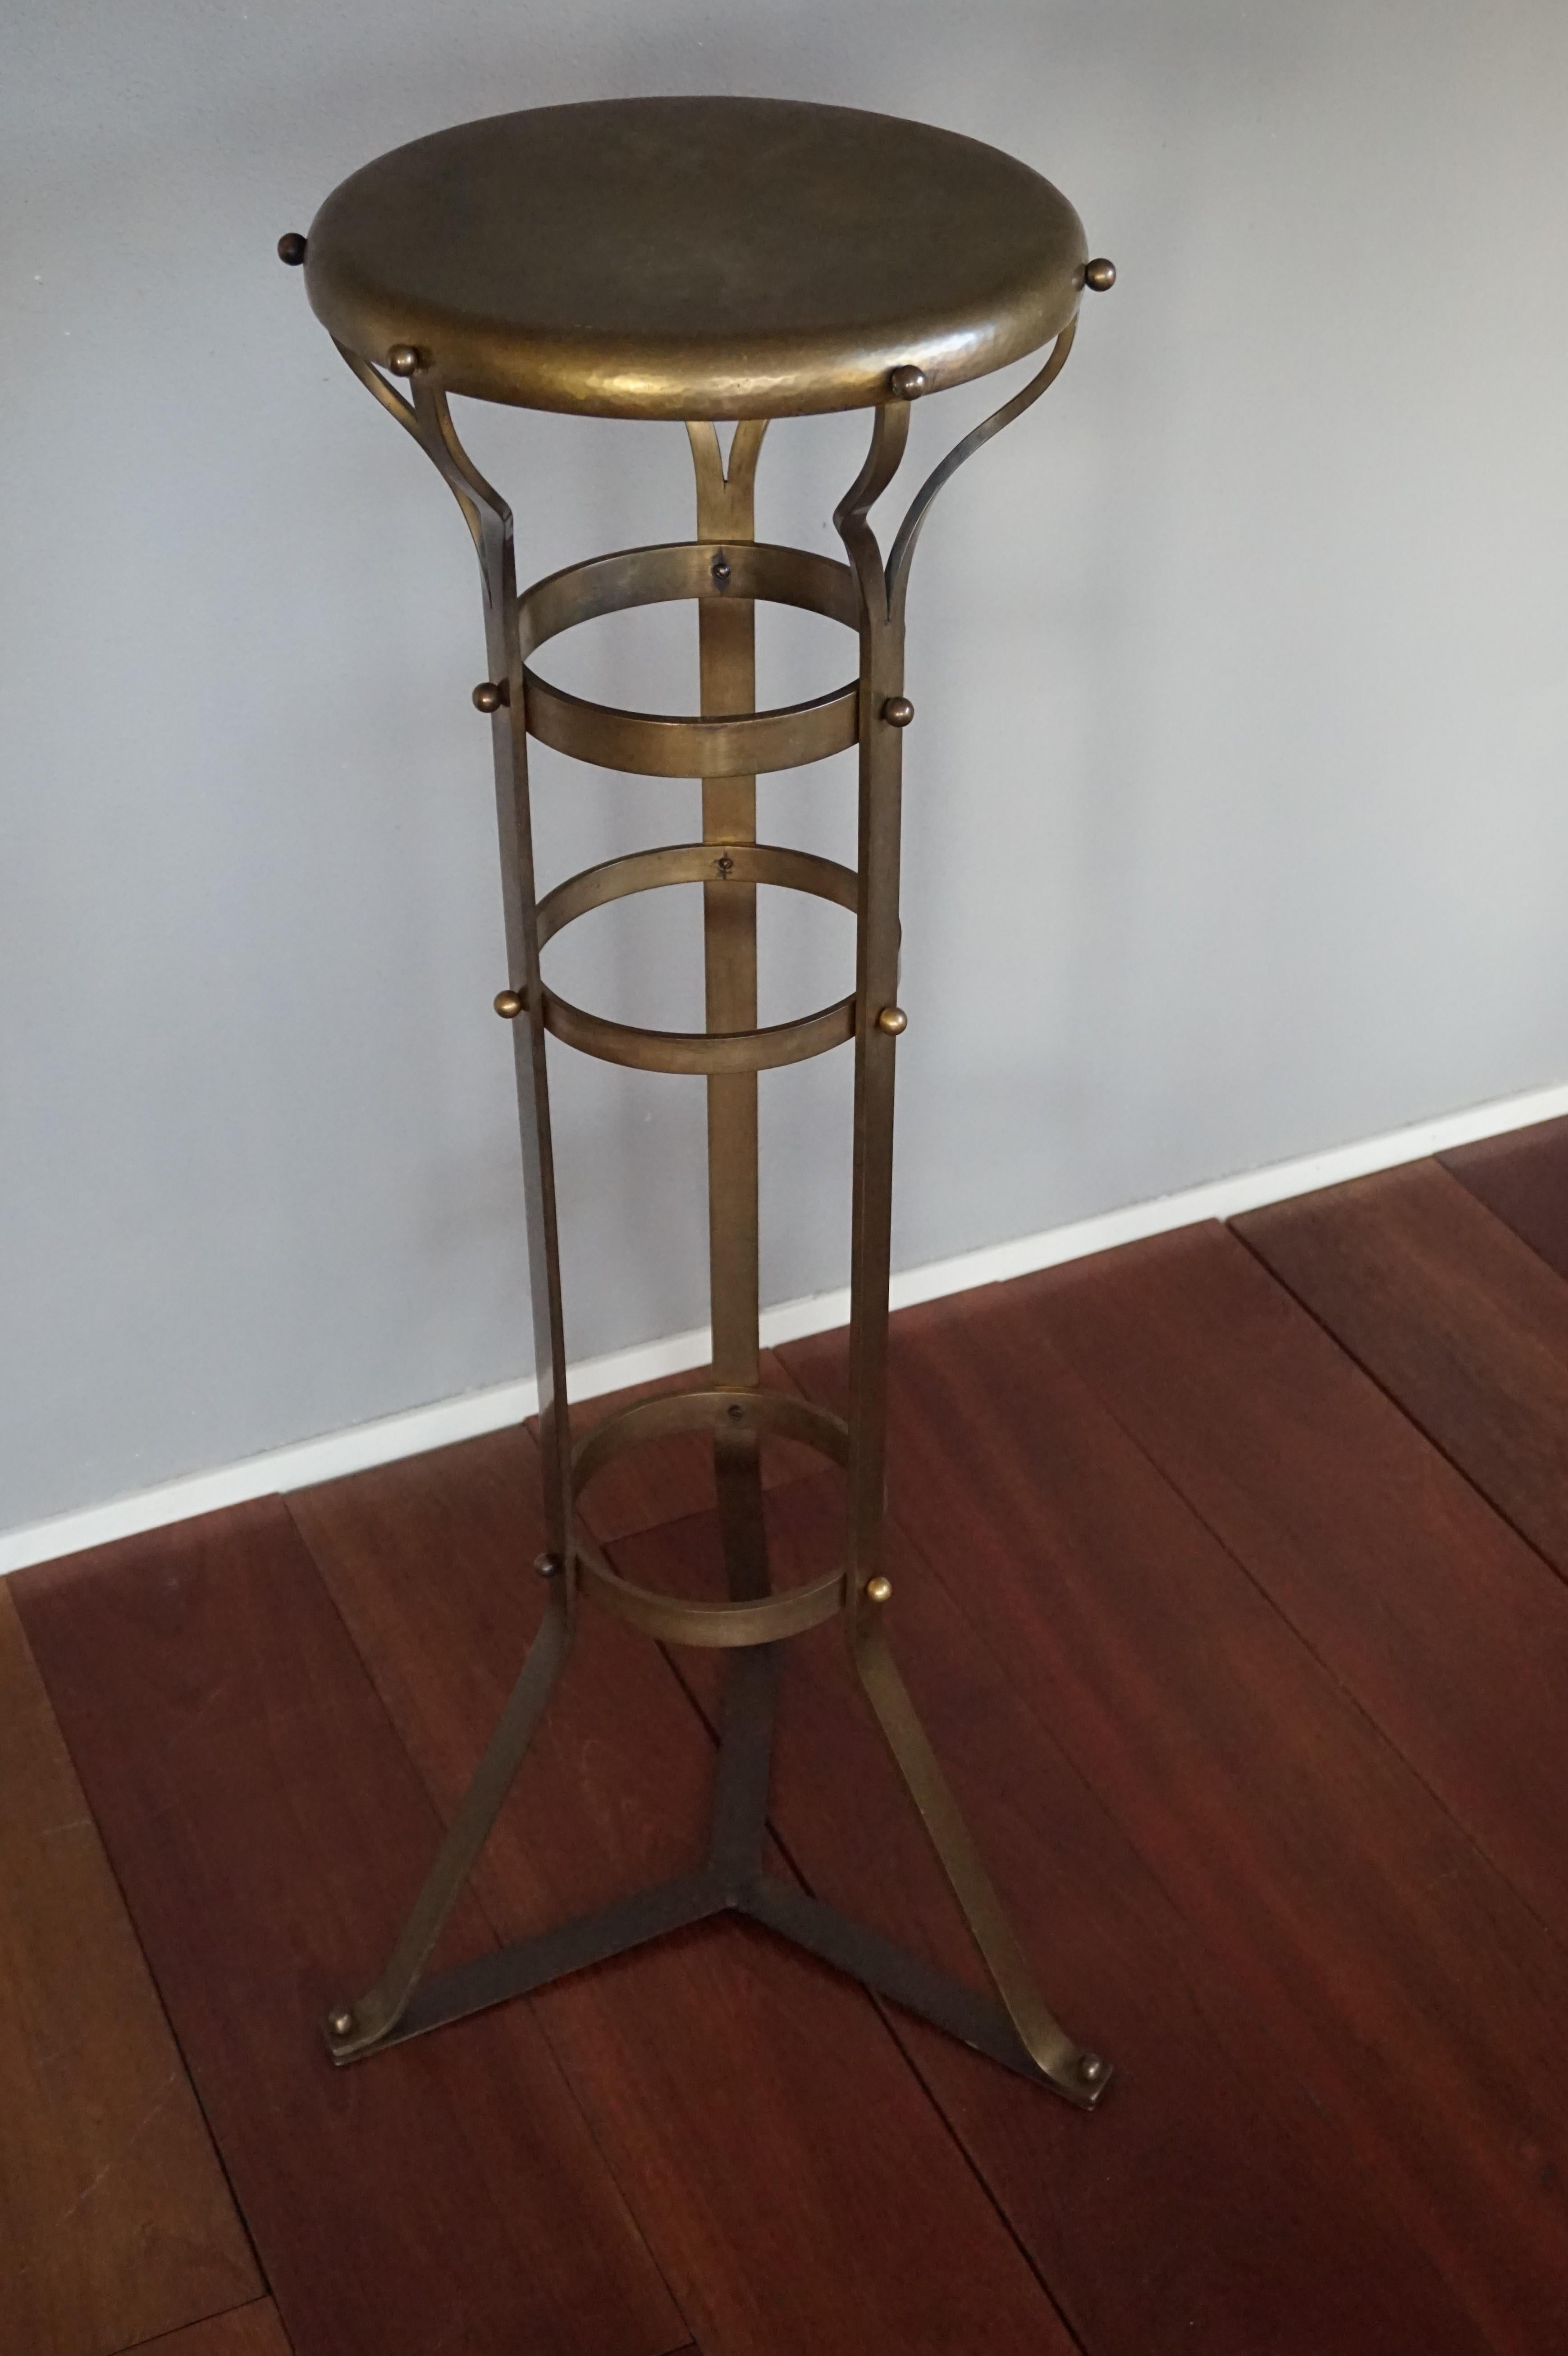 Striking and Top Quality Made Solid Brass Arts & Crafts Pedestal Sculpture Stand 12